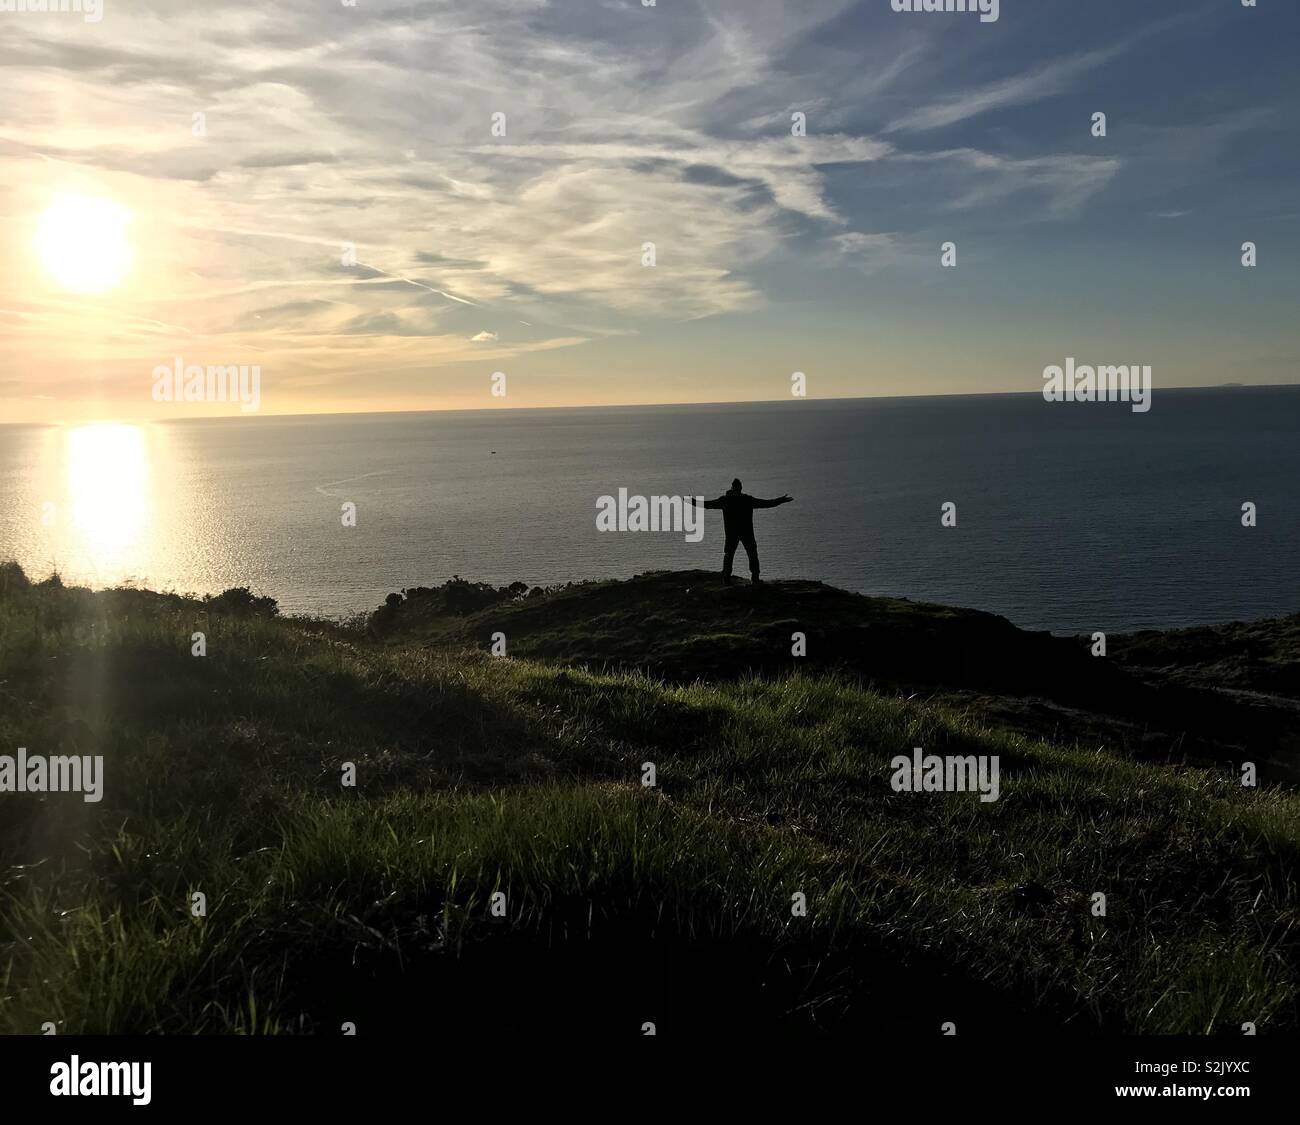 Walking the coastal path in wales at sunset Stock Photo